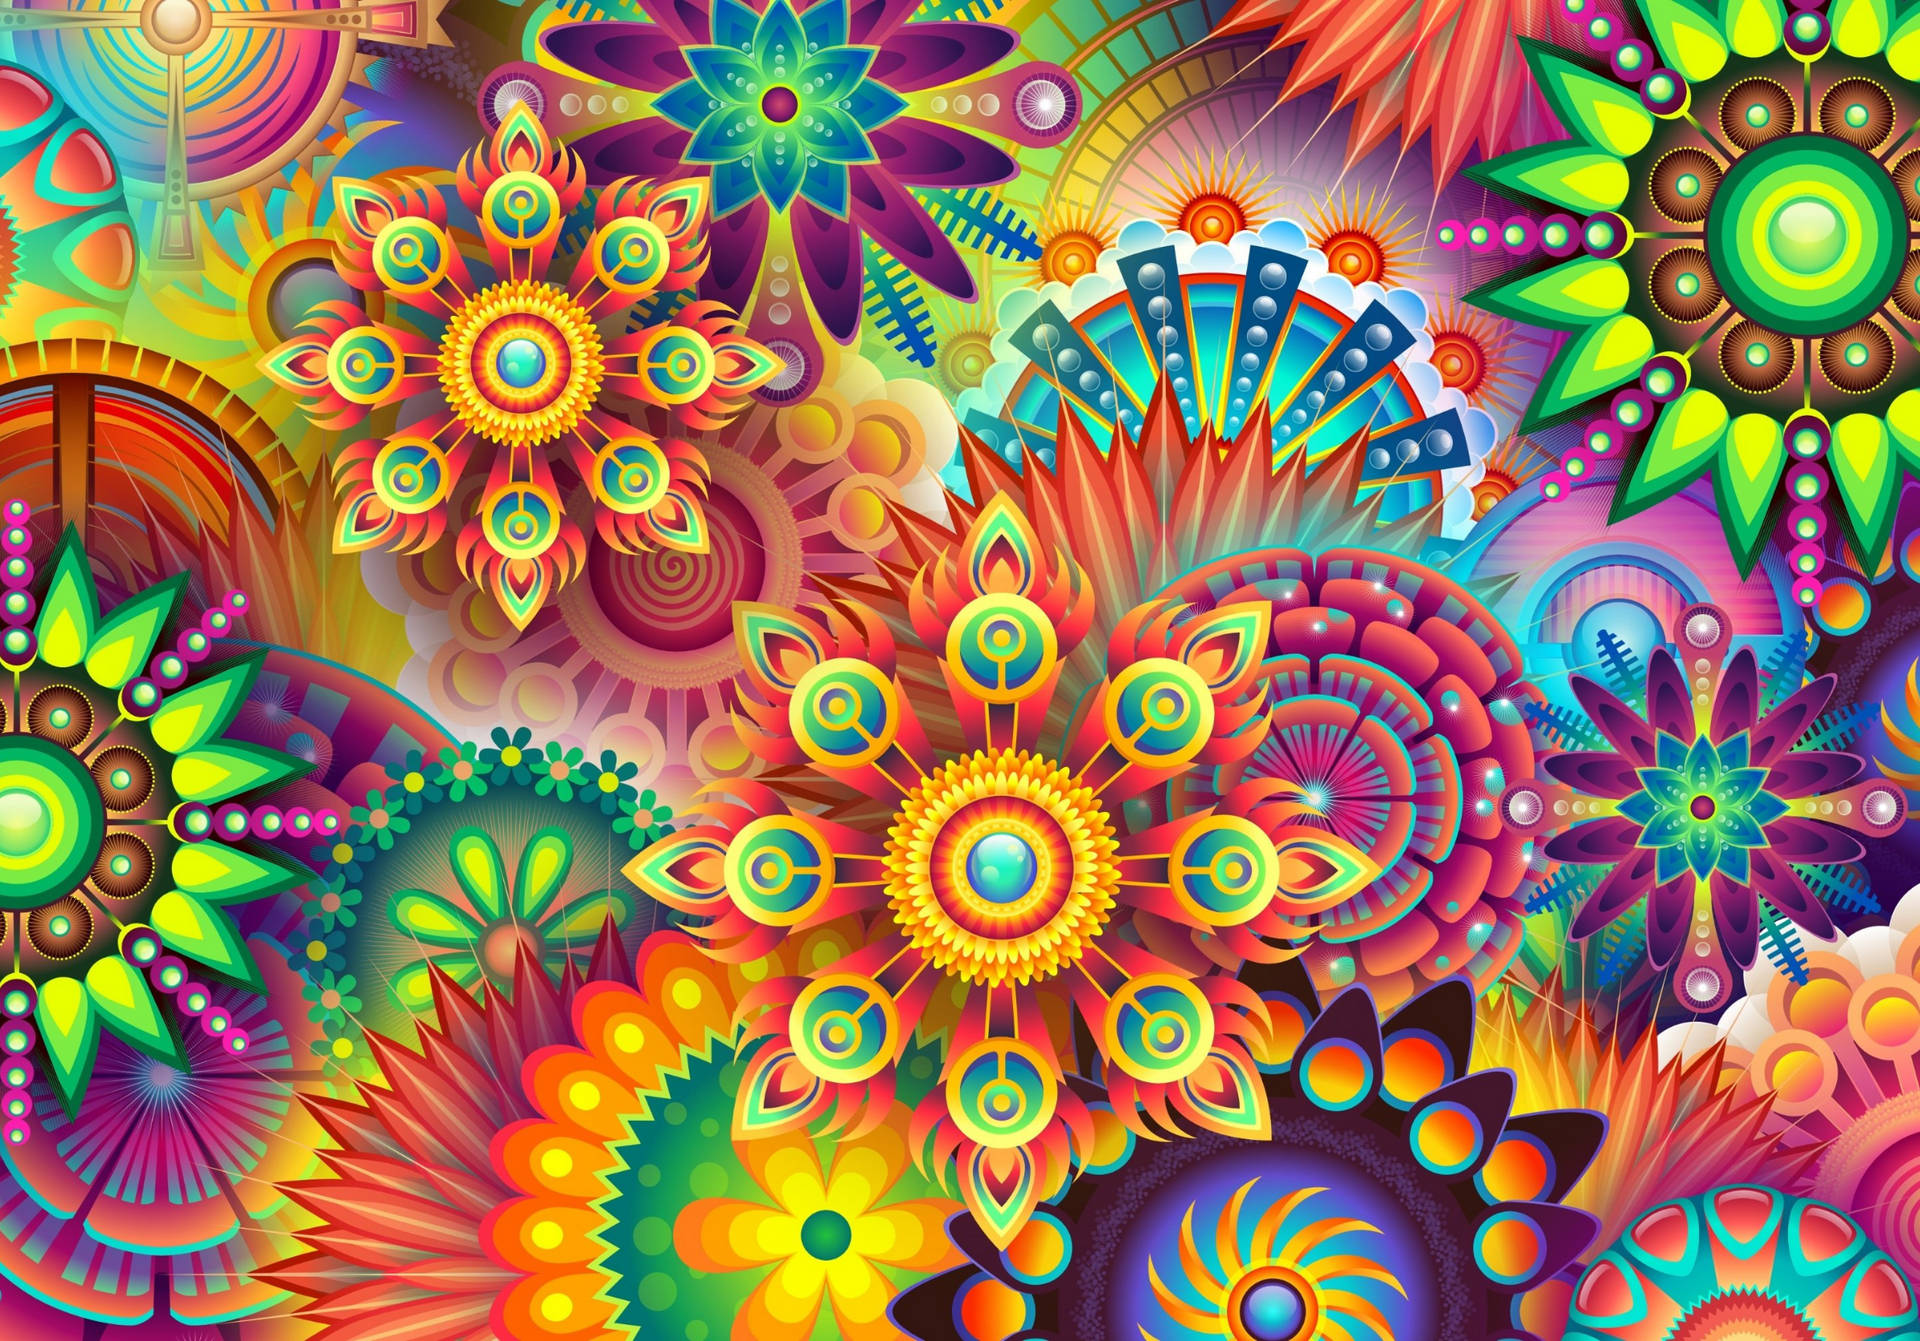 Ipad Pro 12.9 Psychedelic Flowers Picture